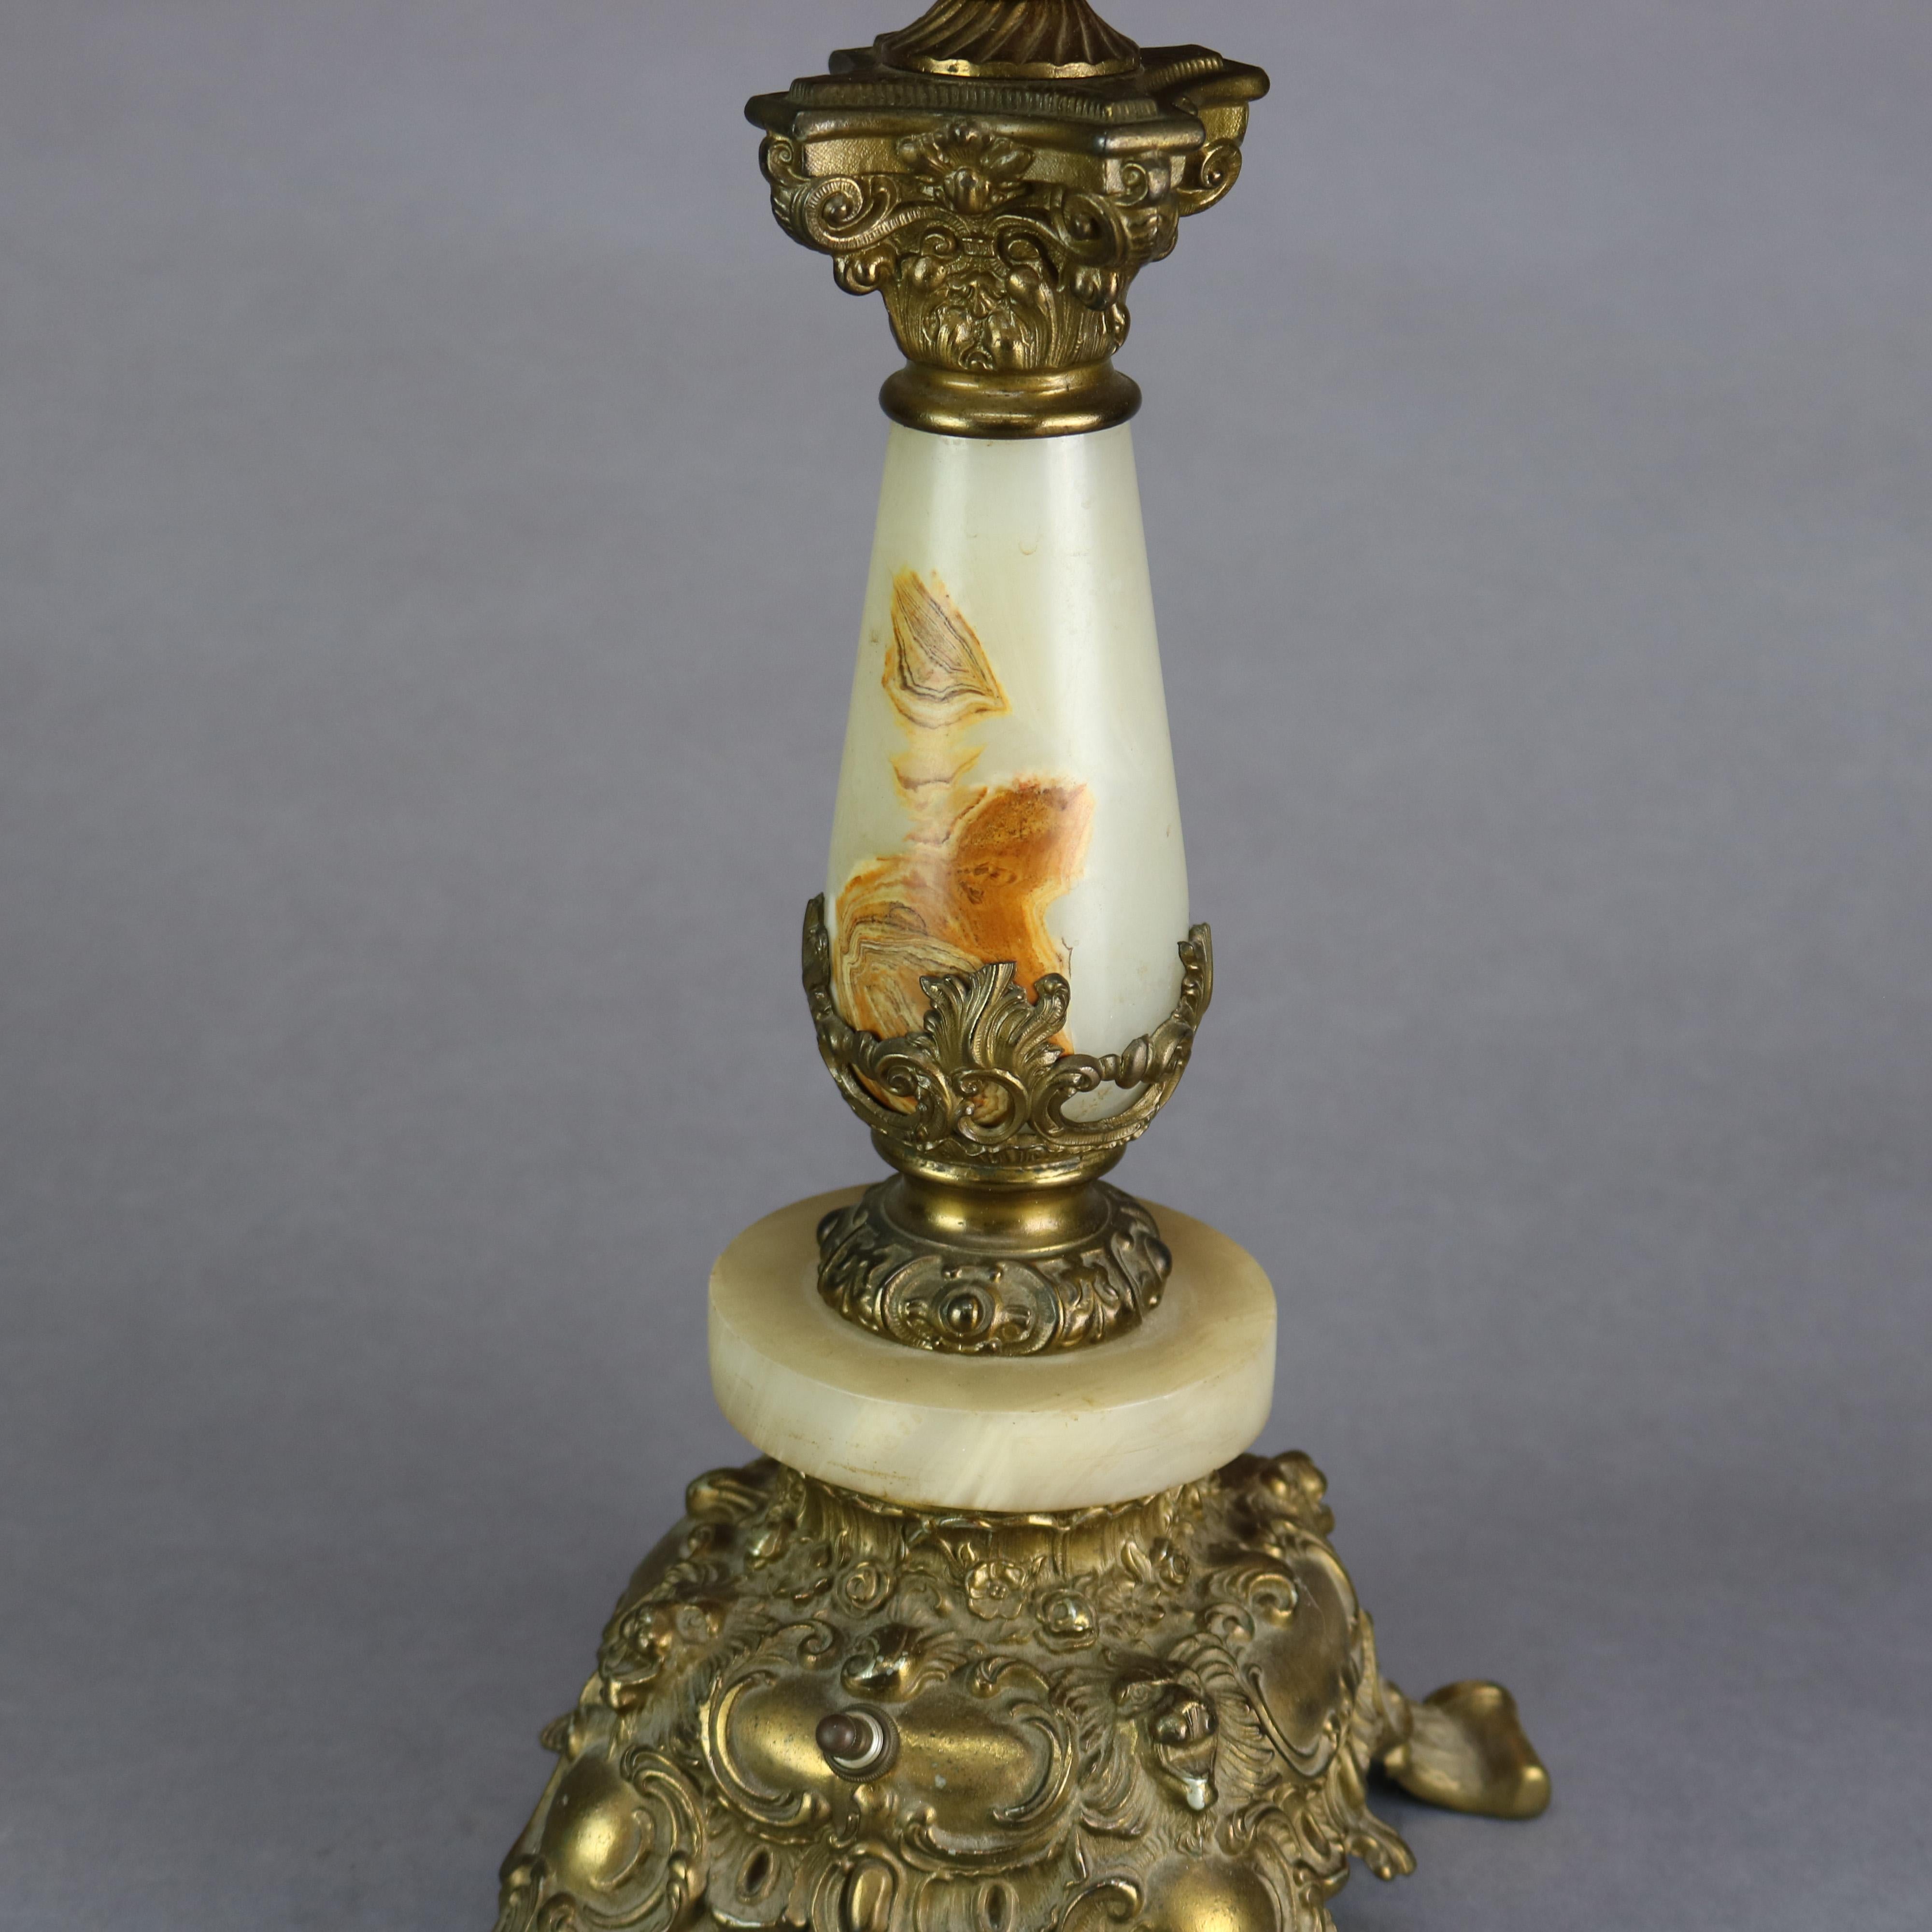 An antique Victorian Rococo parlor lamp offers hand painted floral shade surmounting base with pierced gilt metal foliate and scroll font with onyx column seated on embossed base having scroll form feet, electrified, c1890.

Measures: 32.5